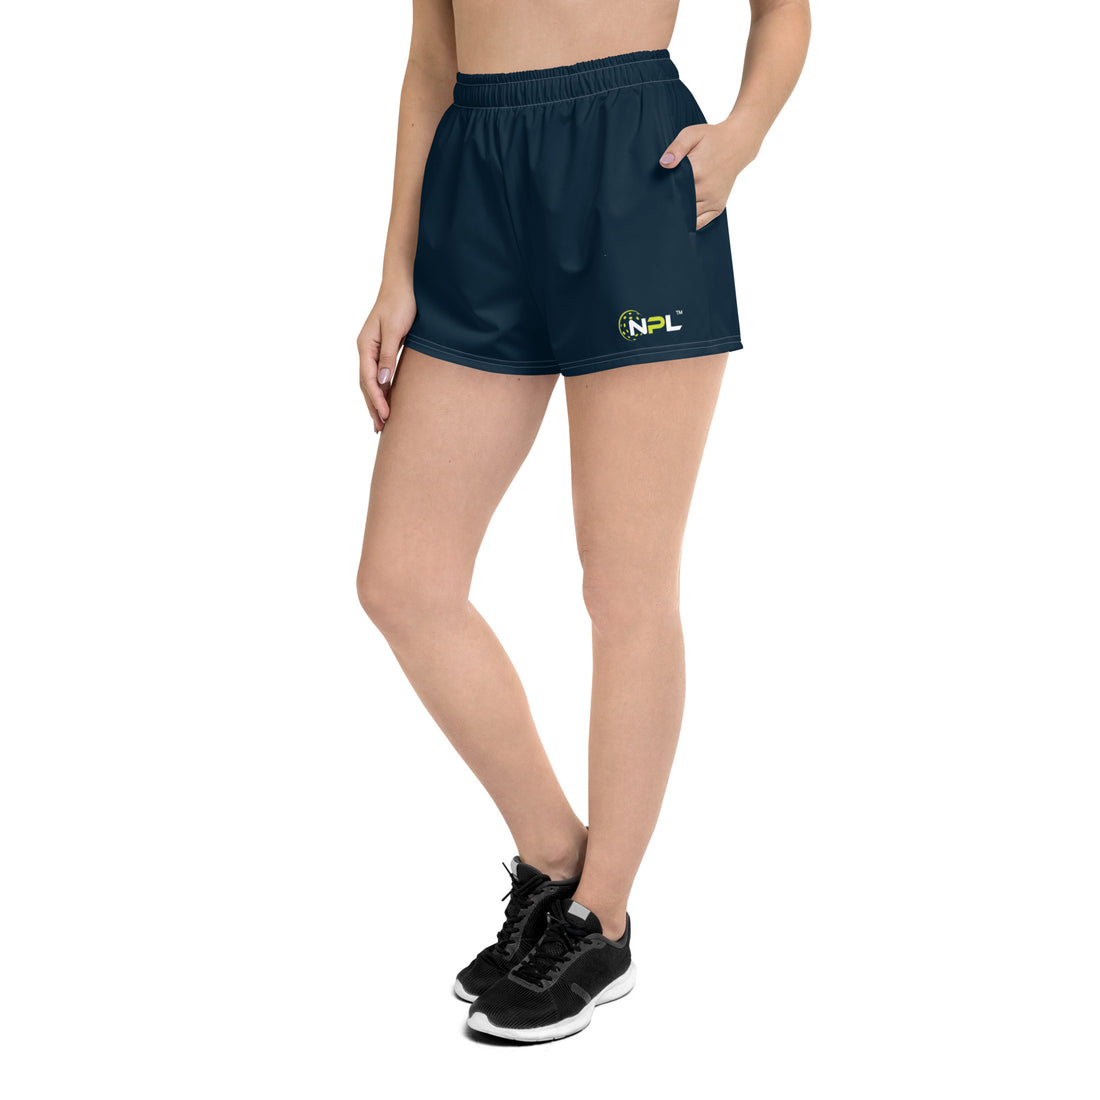 Eileen Giger 3 Boca Raton Picklers™ SKYblue™ 2023 Authentic Shorts for Women - Dark Blue